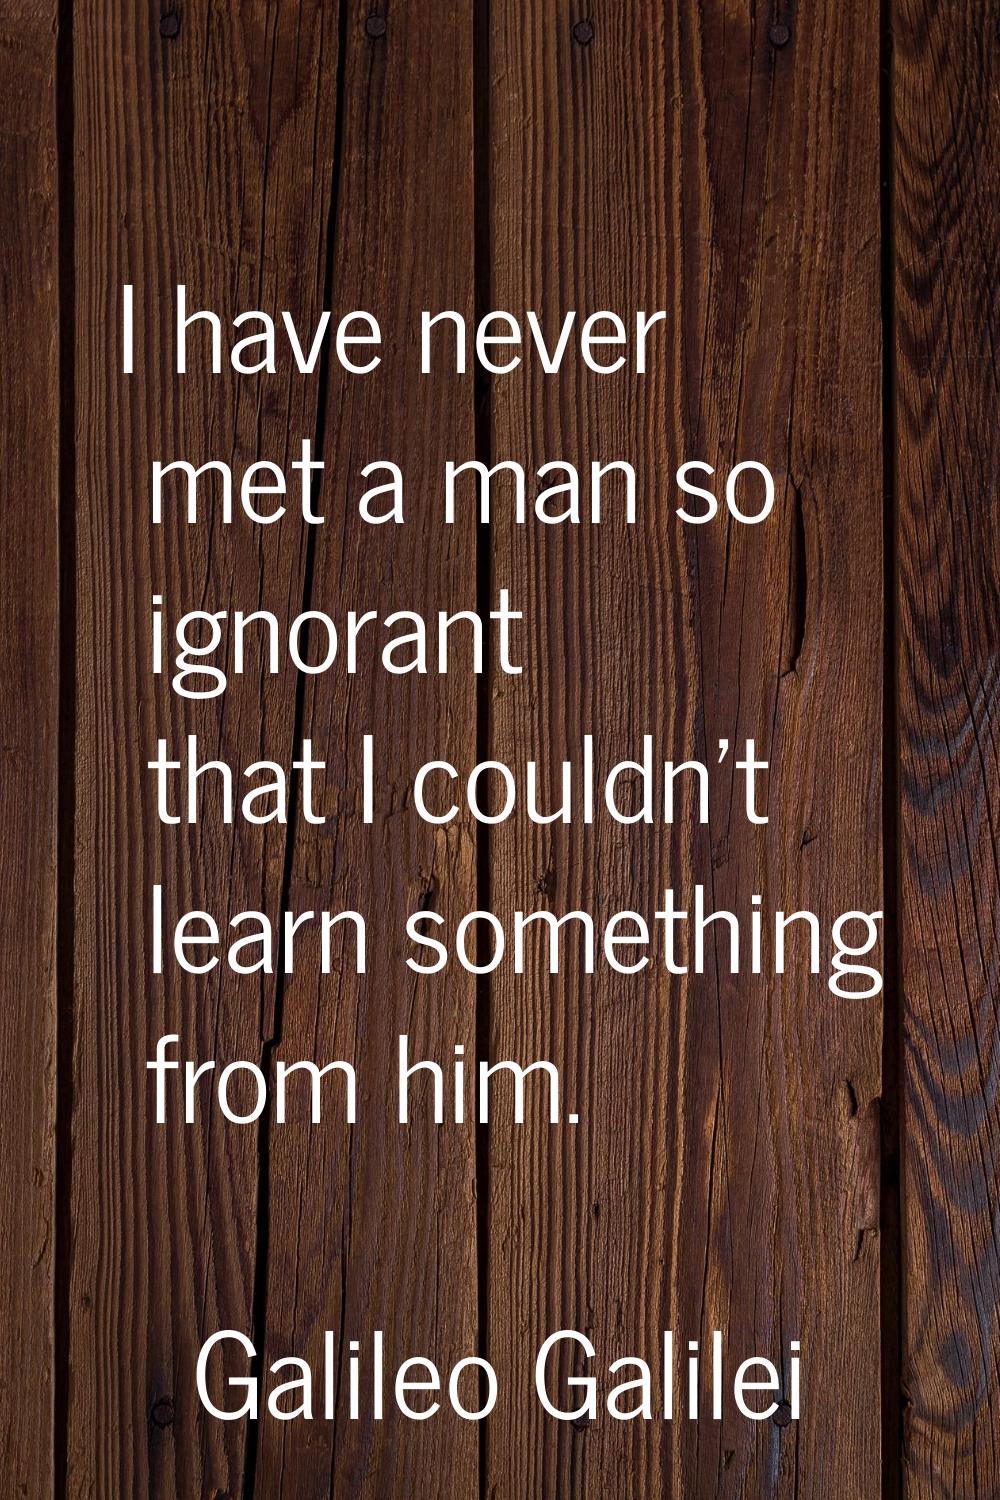 I have never met a man so ignorant that I couldn't learn something from him.